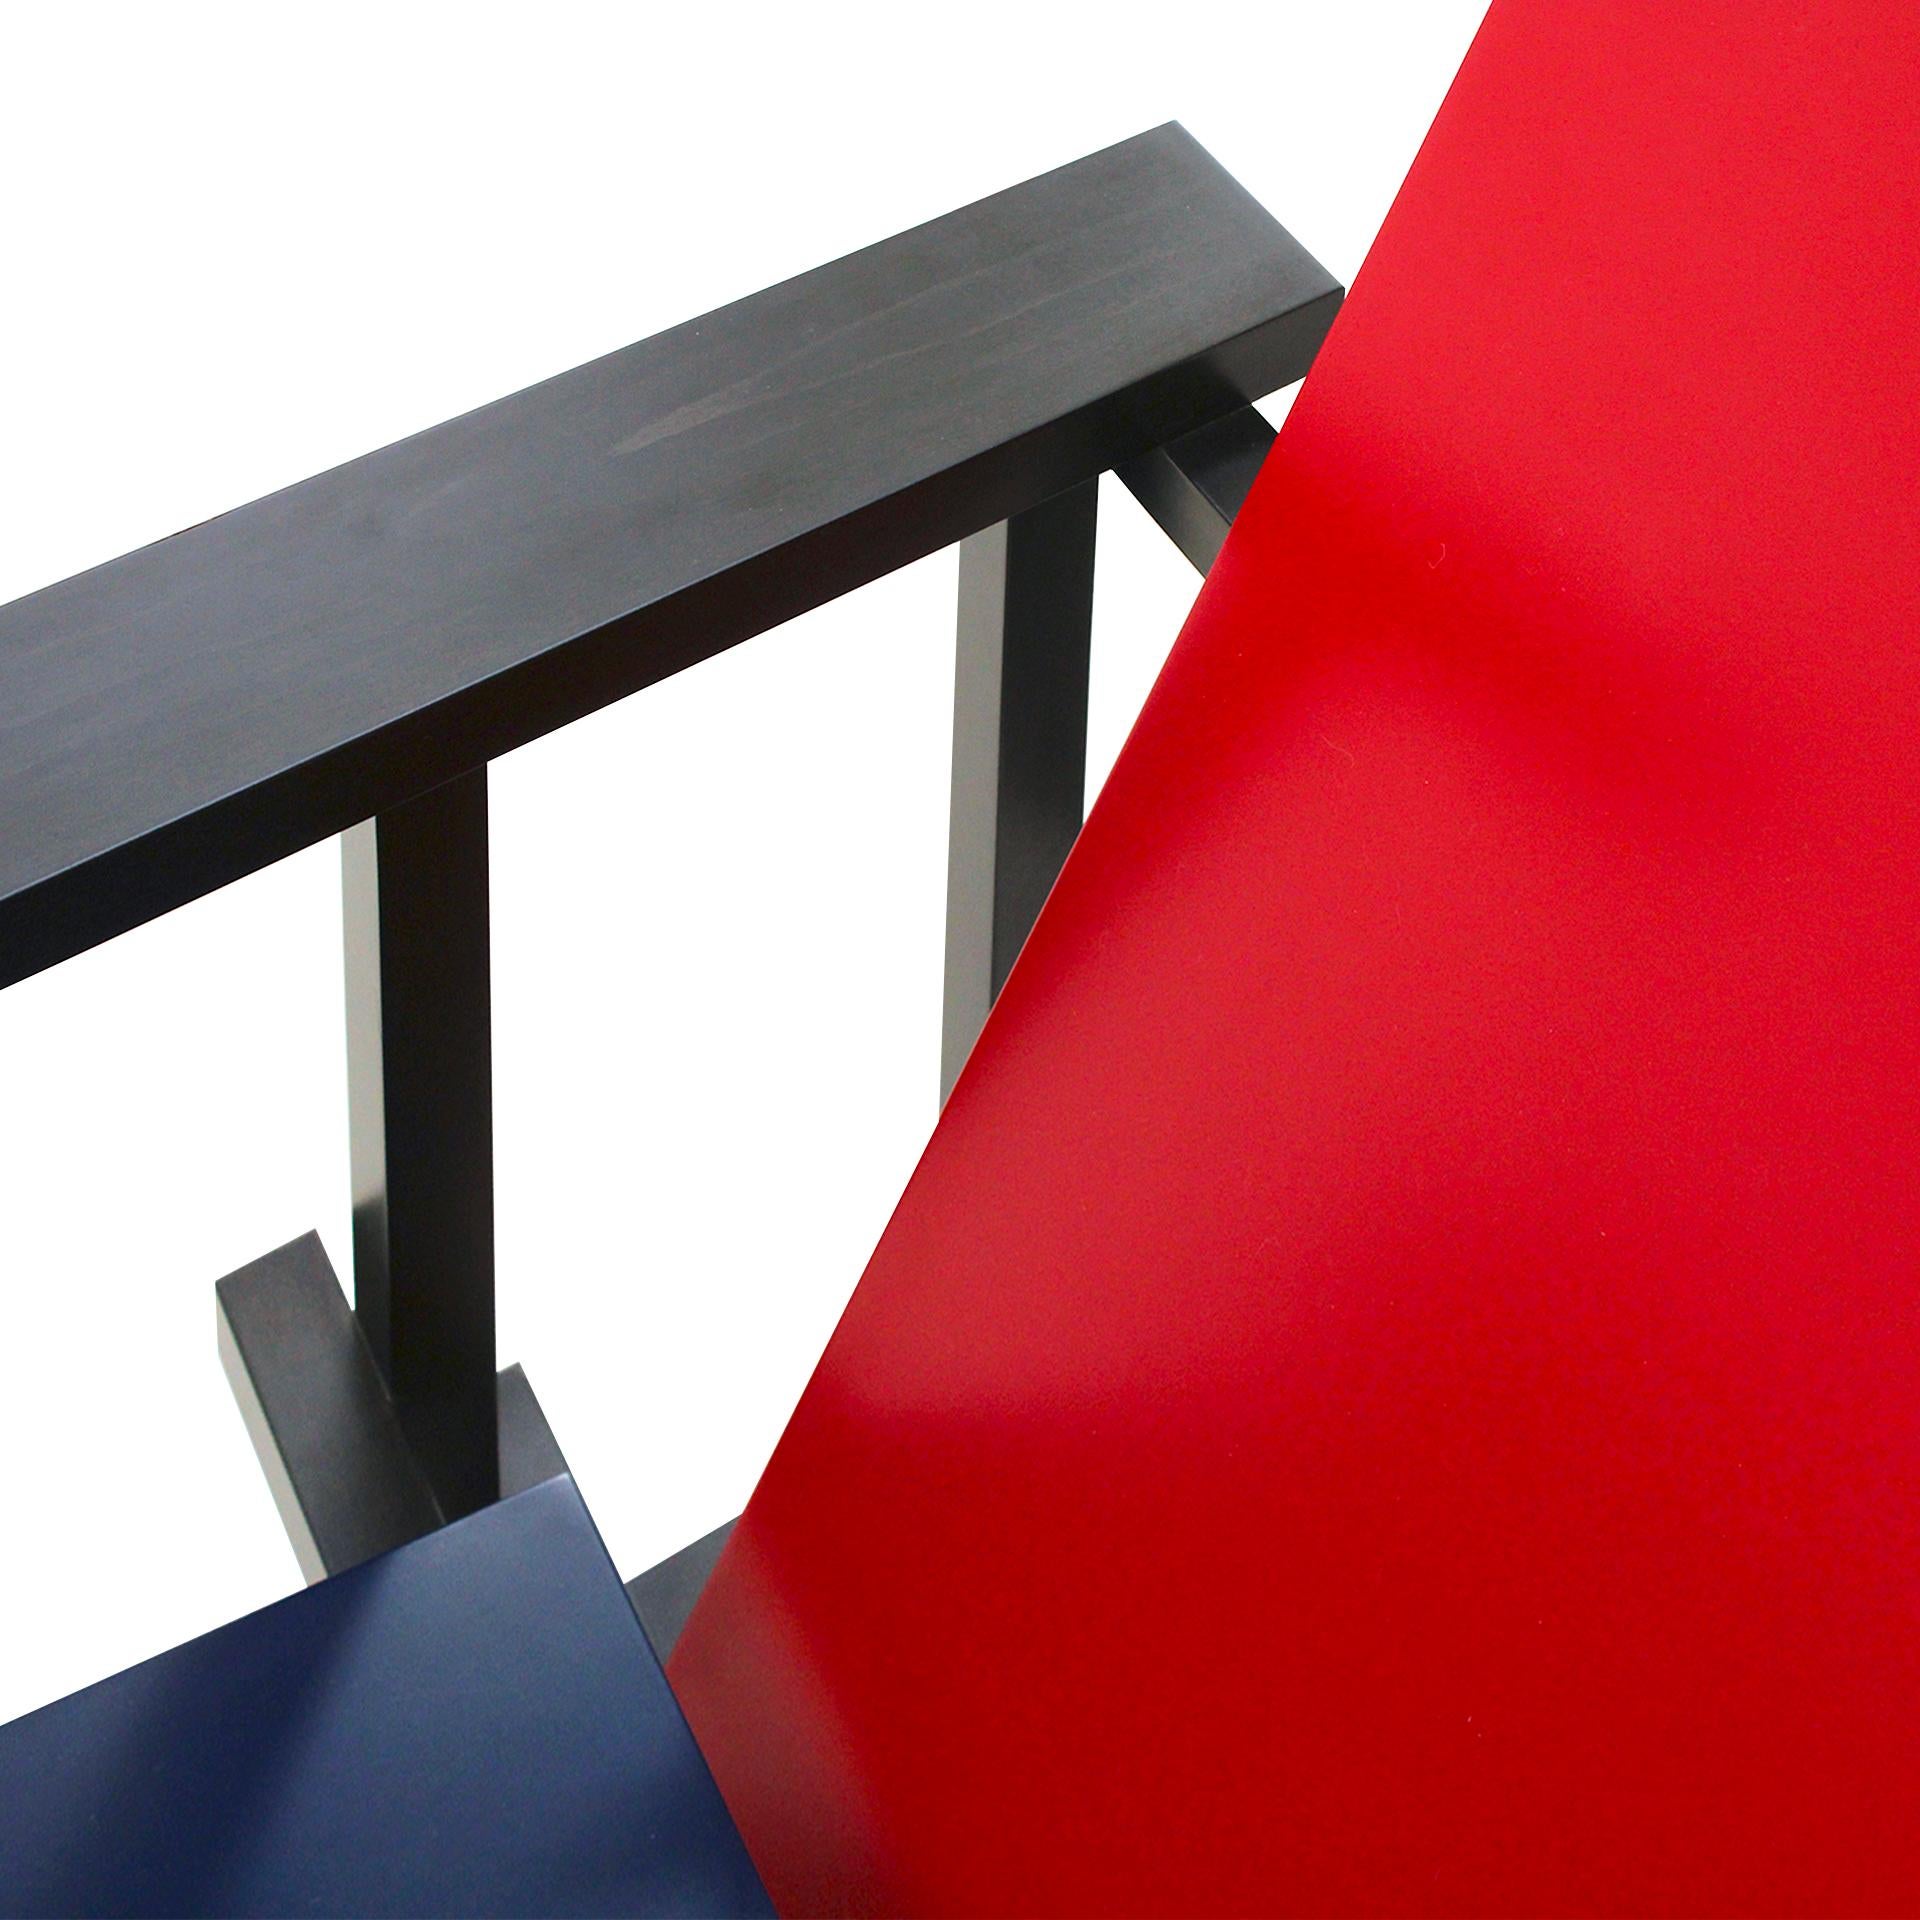 Lacquered Red and Blue Chair Designed by Gerrit T. Rietveld for Cassina